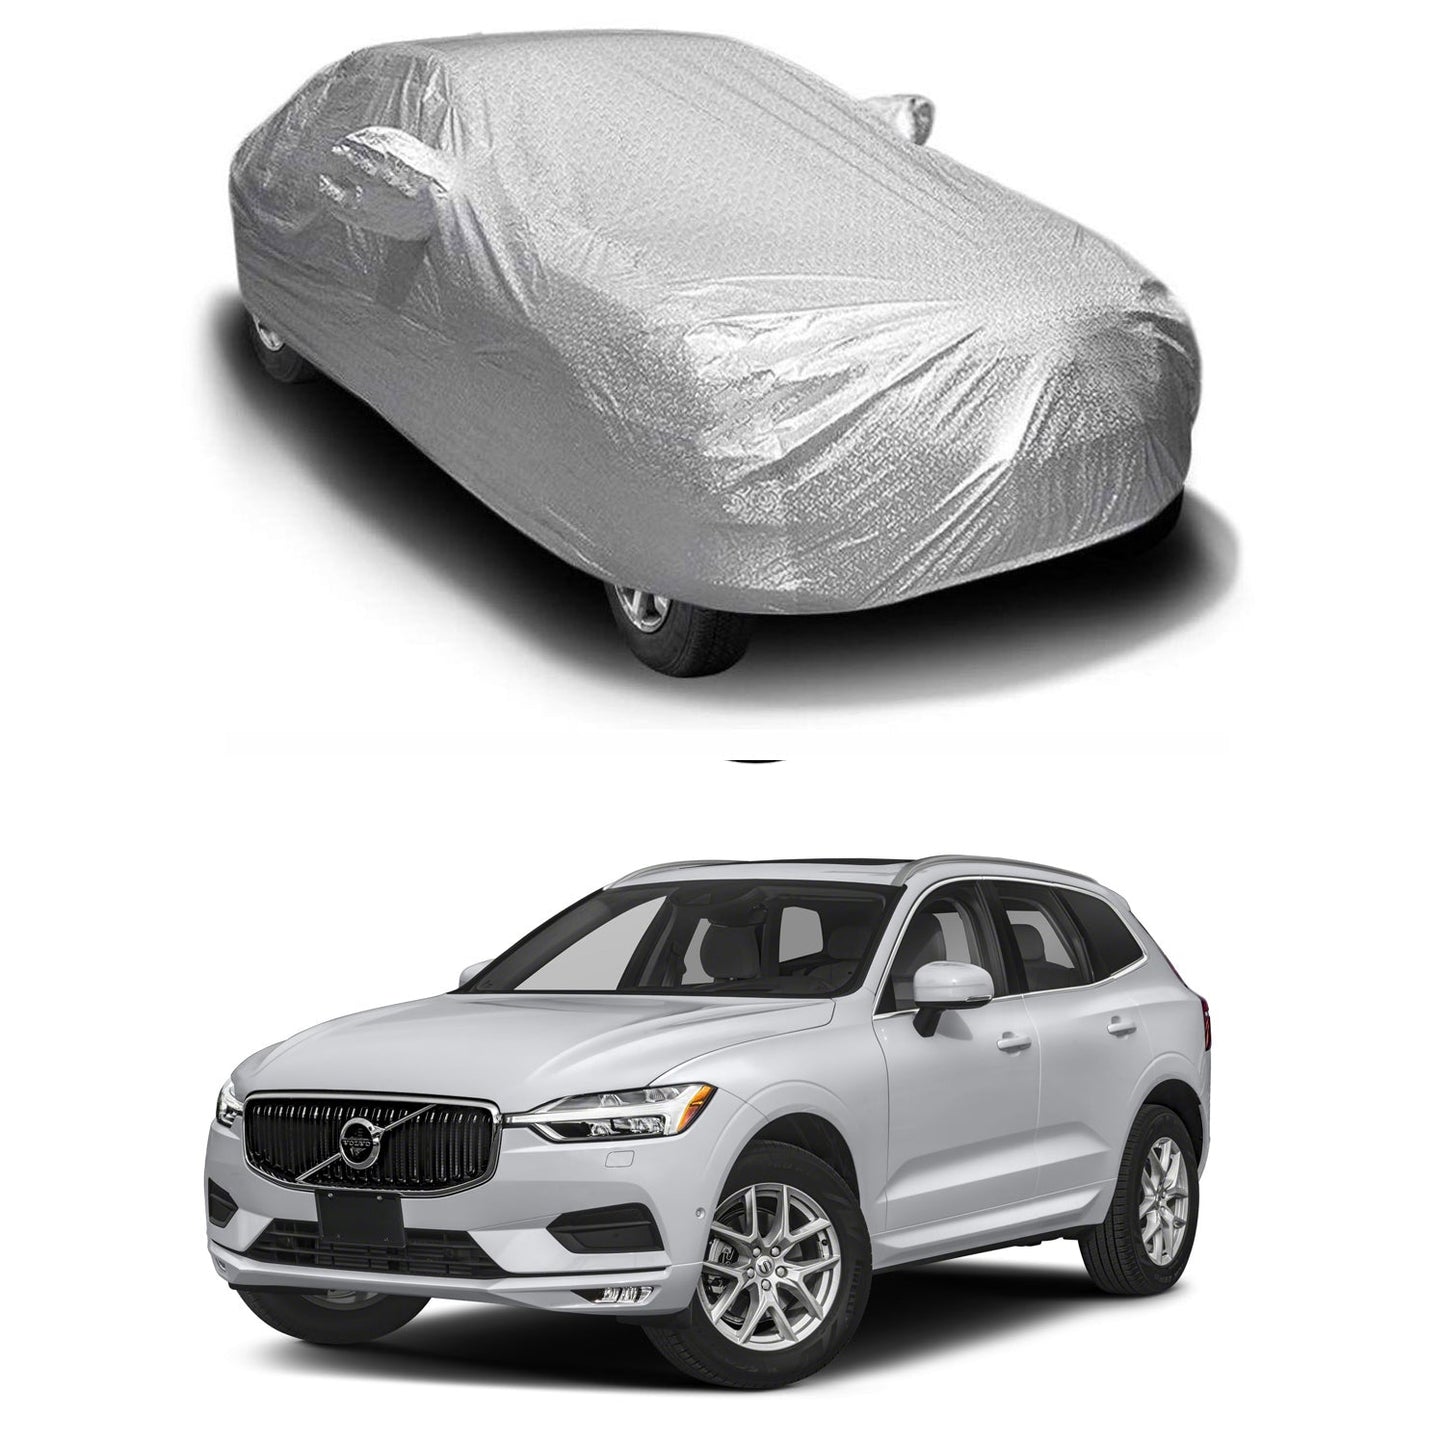 Oshotto Spyro Silver Anti Reflective, dustproof and Water Proof Car Body Cover with Mirror Pockets For Volvo XC60